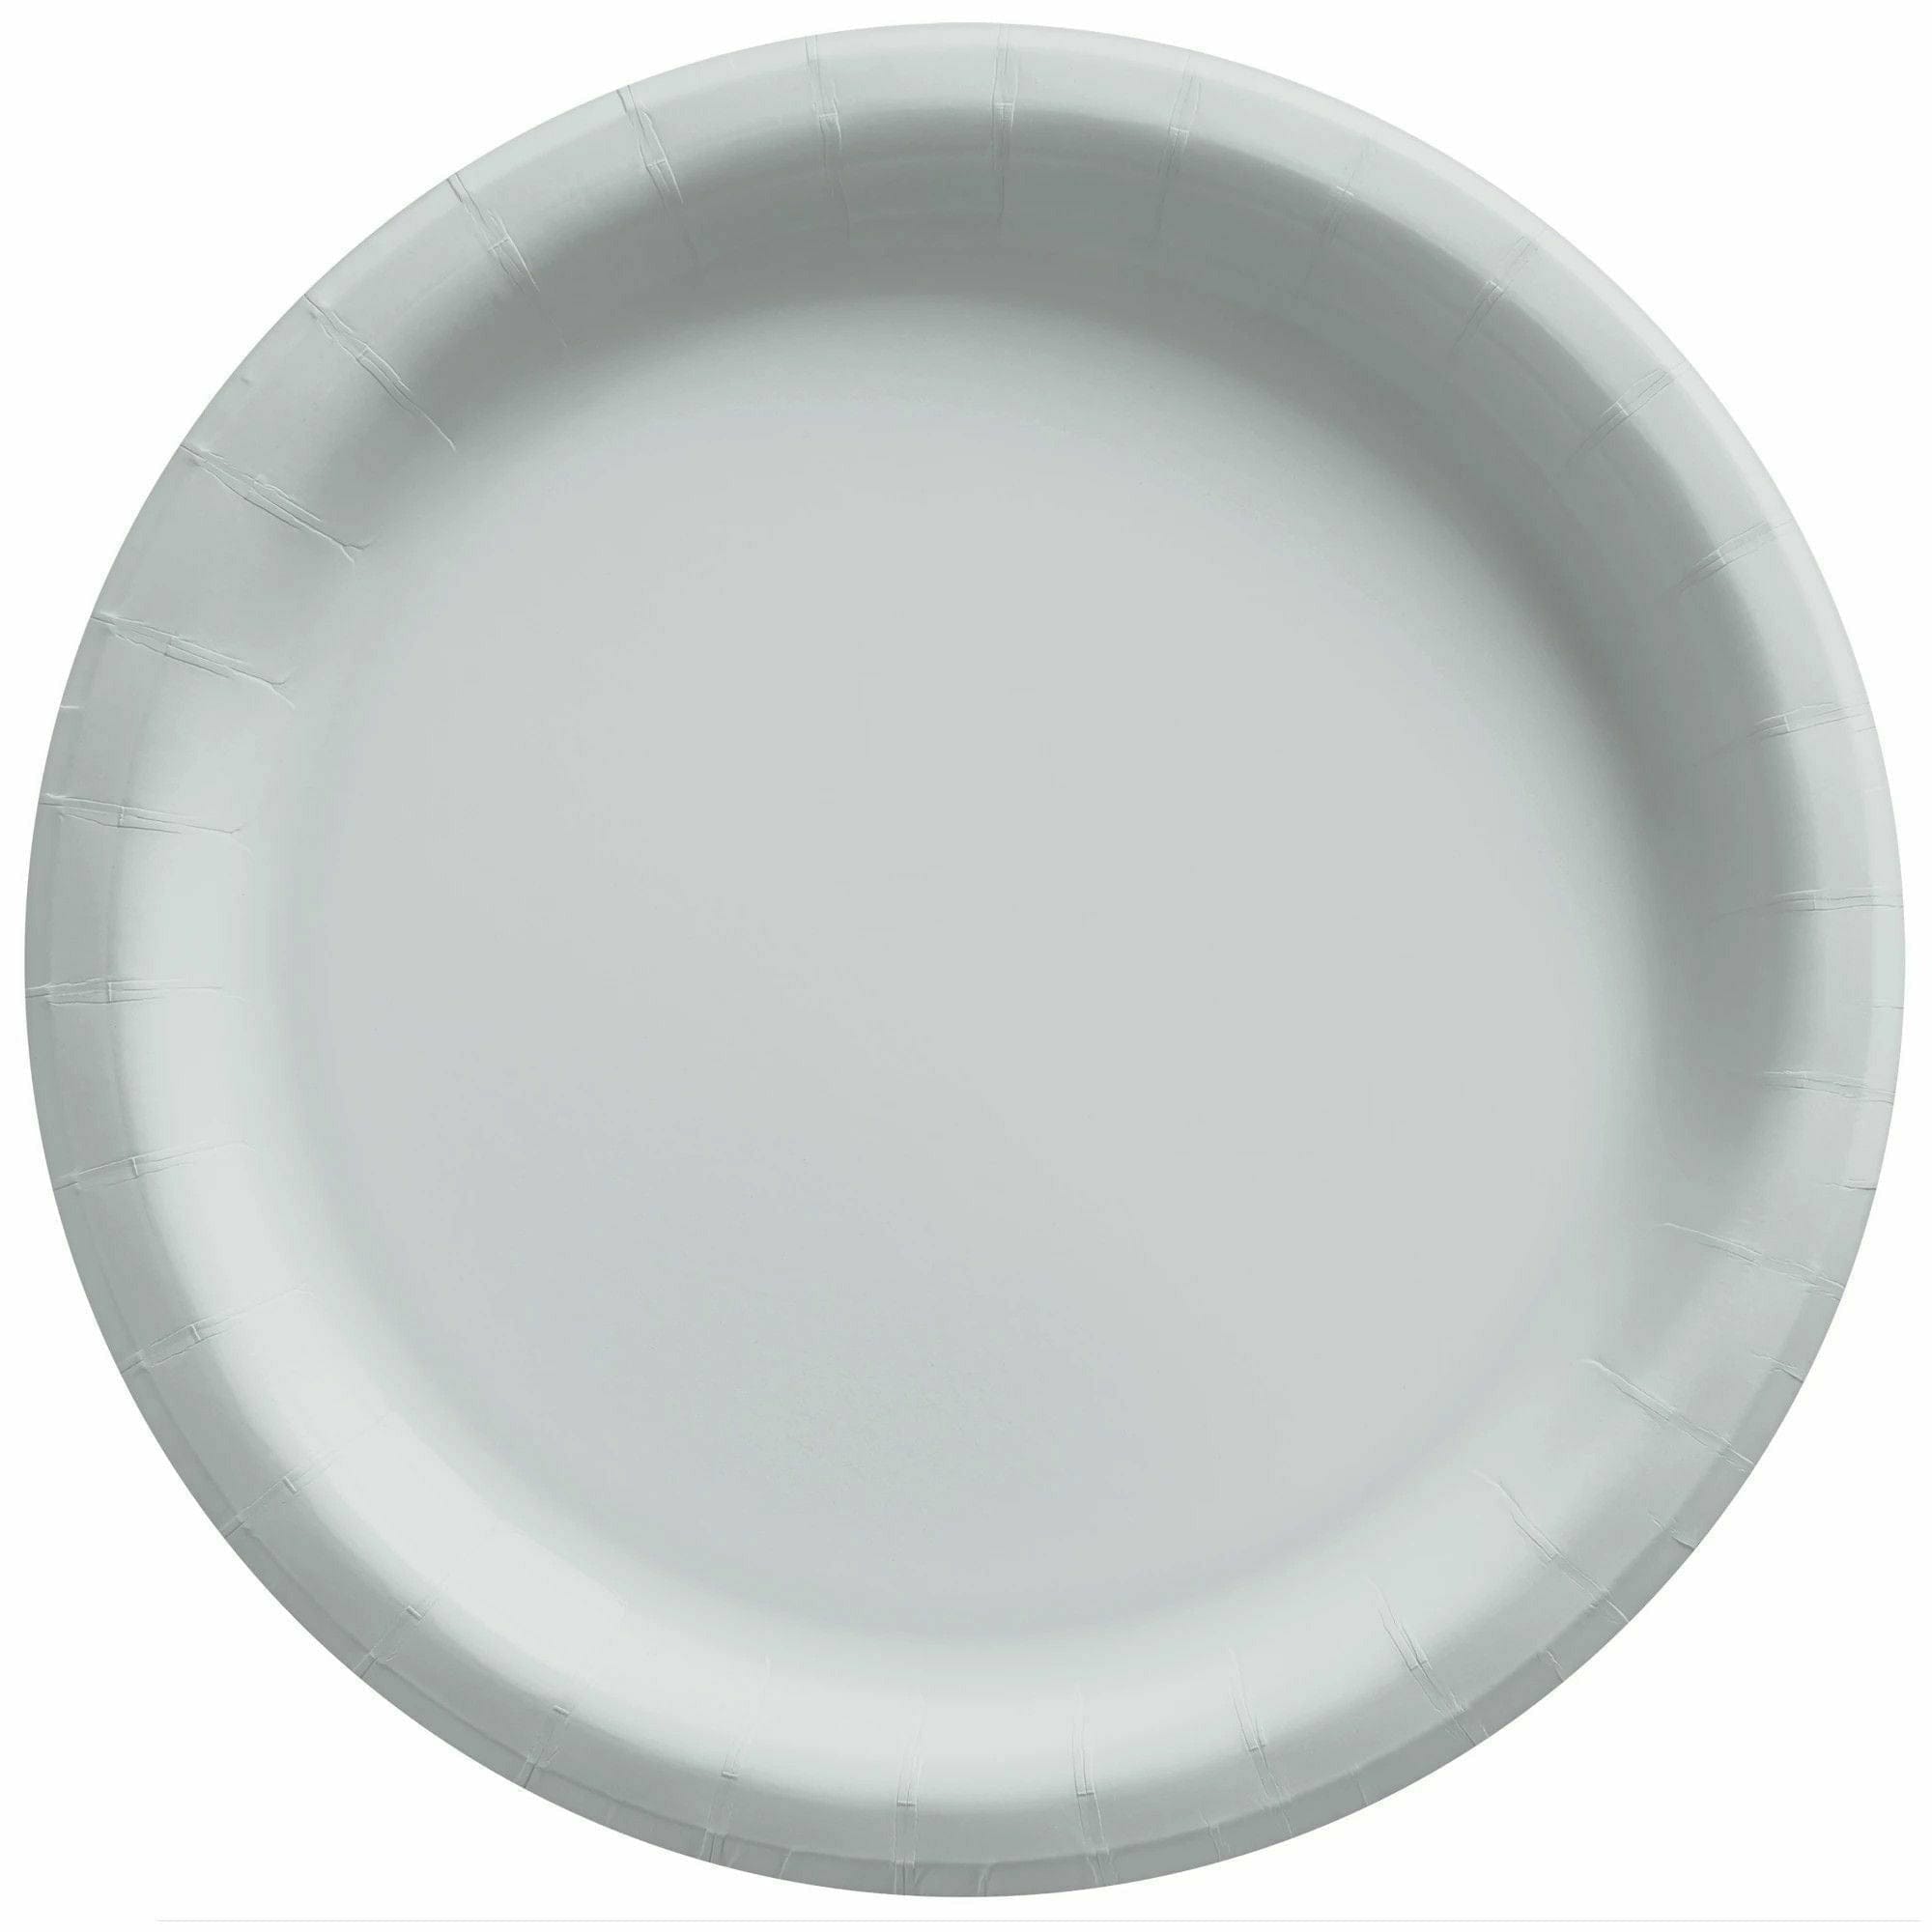 Amscan BASIC Silver - 6 3/4" Round Paper Plates, 20 Ct.